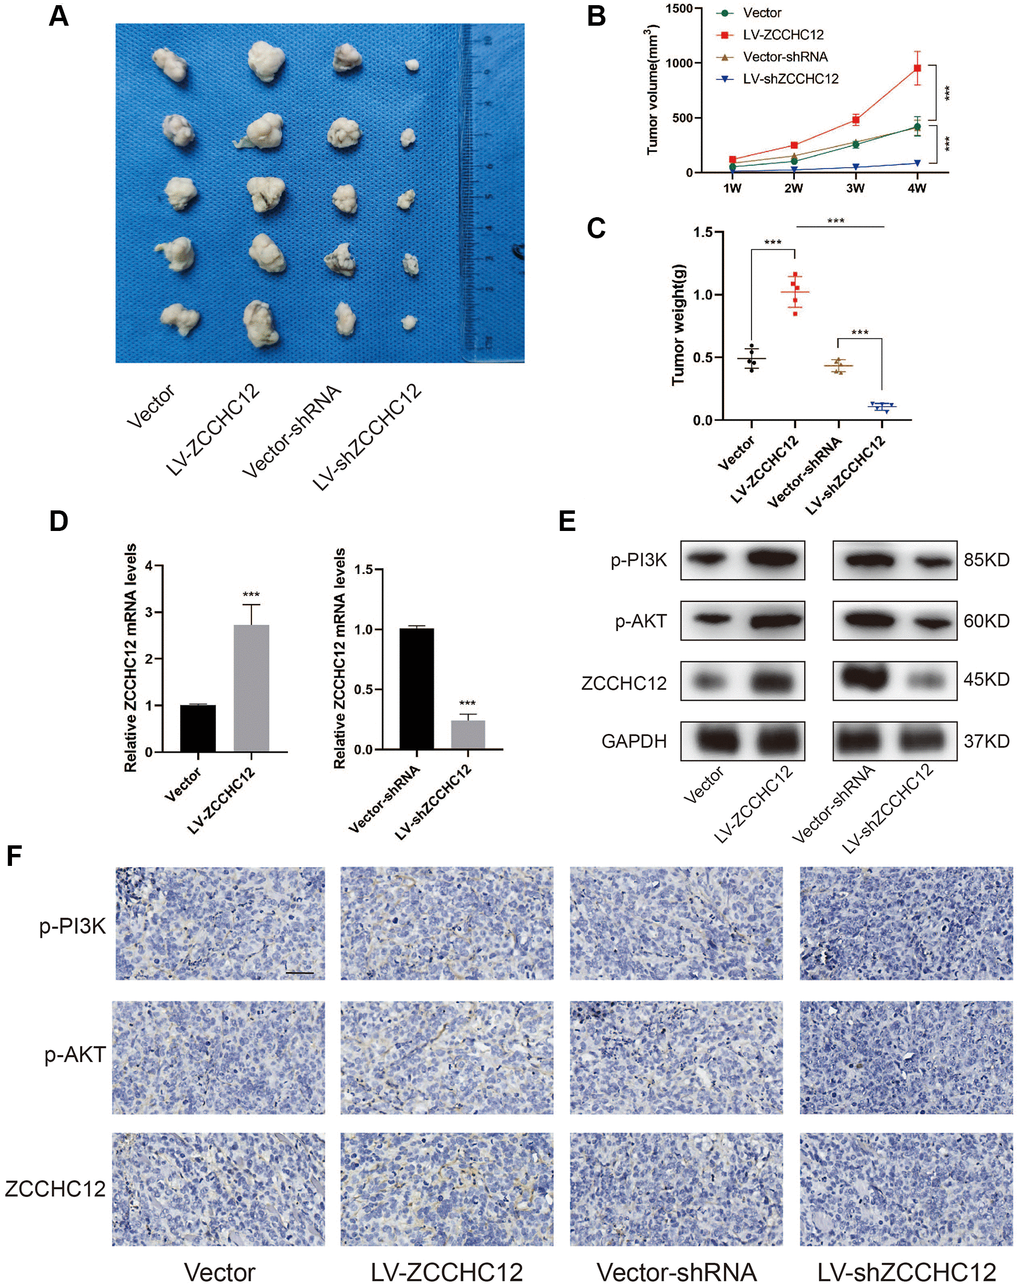 ZCCHC12 promoted OS cells tumorigenicity in vivo. (A) Subcutaneous tumors were removed from nude mice and fixed in 0.4% formalin. (B and C), Tumor volume and weights of xenografts in nude mice were measured. (D), qRT-PCR was applied to examine the expression of ZCCHC12 in tumor xenograft tissues. (E), Western blot was performed to examine the expression of p-PI3K, p-AKT and ZCCHC12 in tumor xenograft tissues. (F) IHC staining for p-PI3K, p-AKT and ZCCHC12 in tumor xenograft tissues. scale bar: 200 μm. n = 5; ***P 